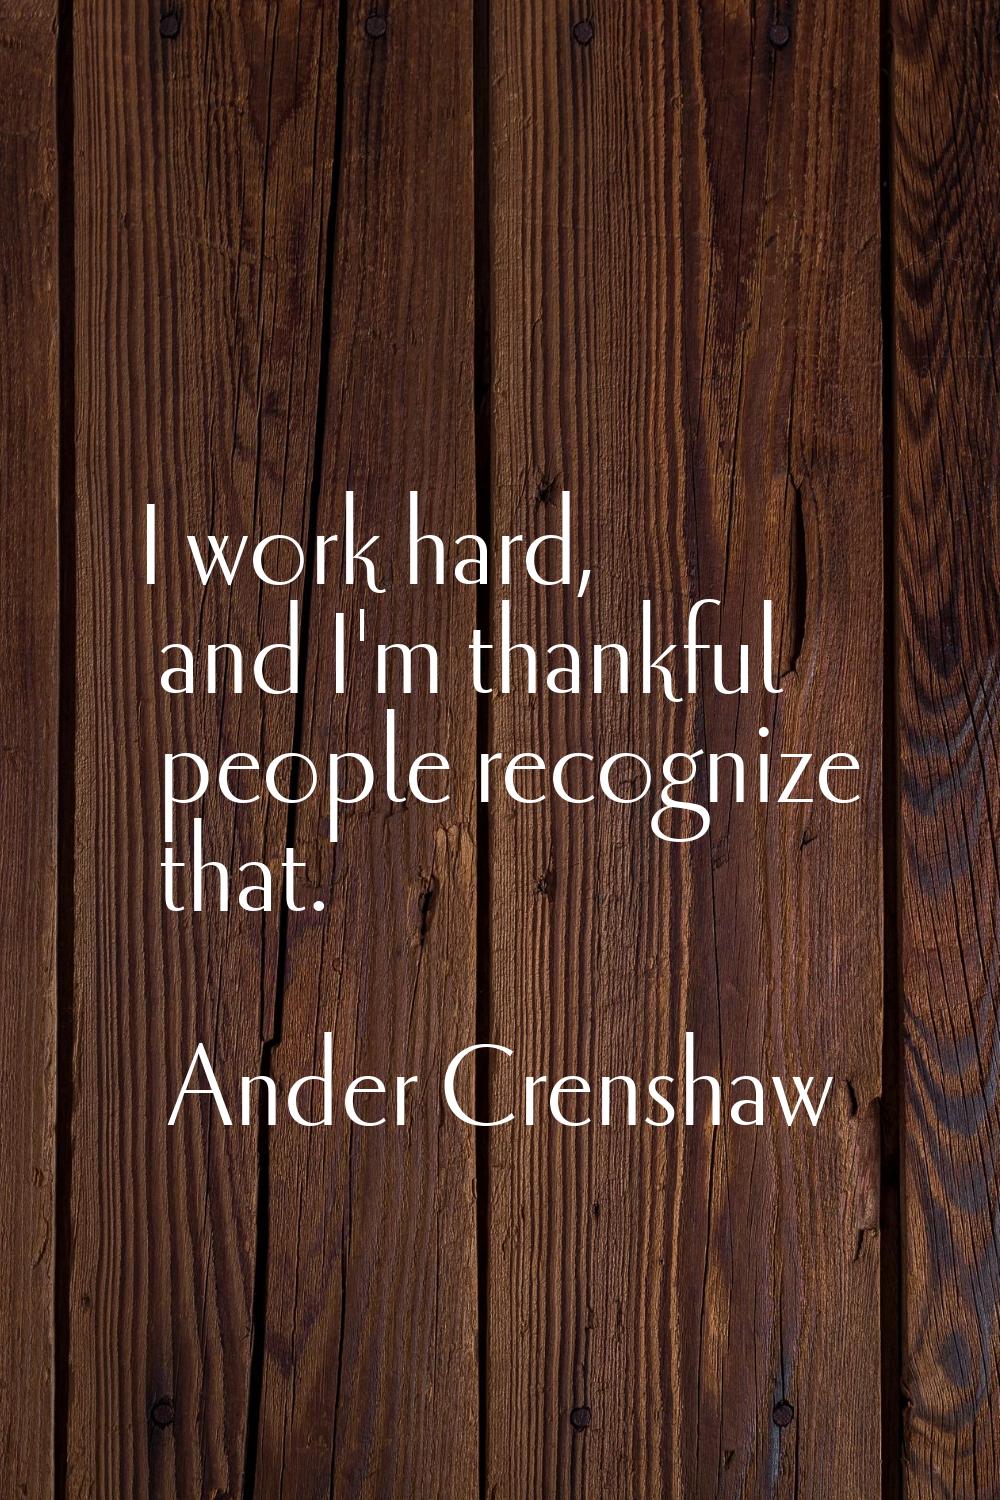 I work hard, and I'm thankful people recognize that.